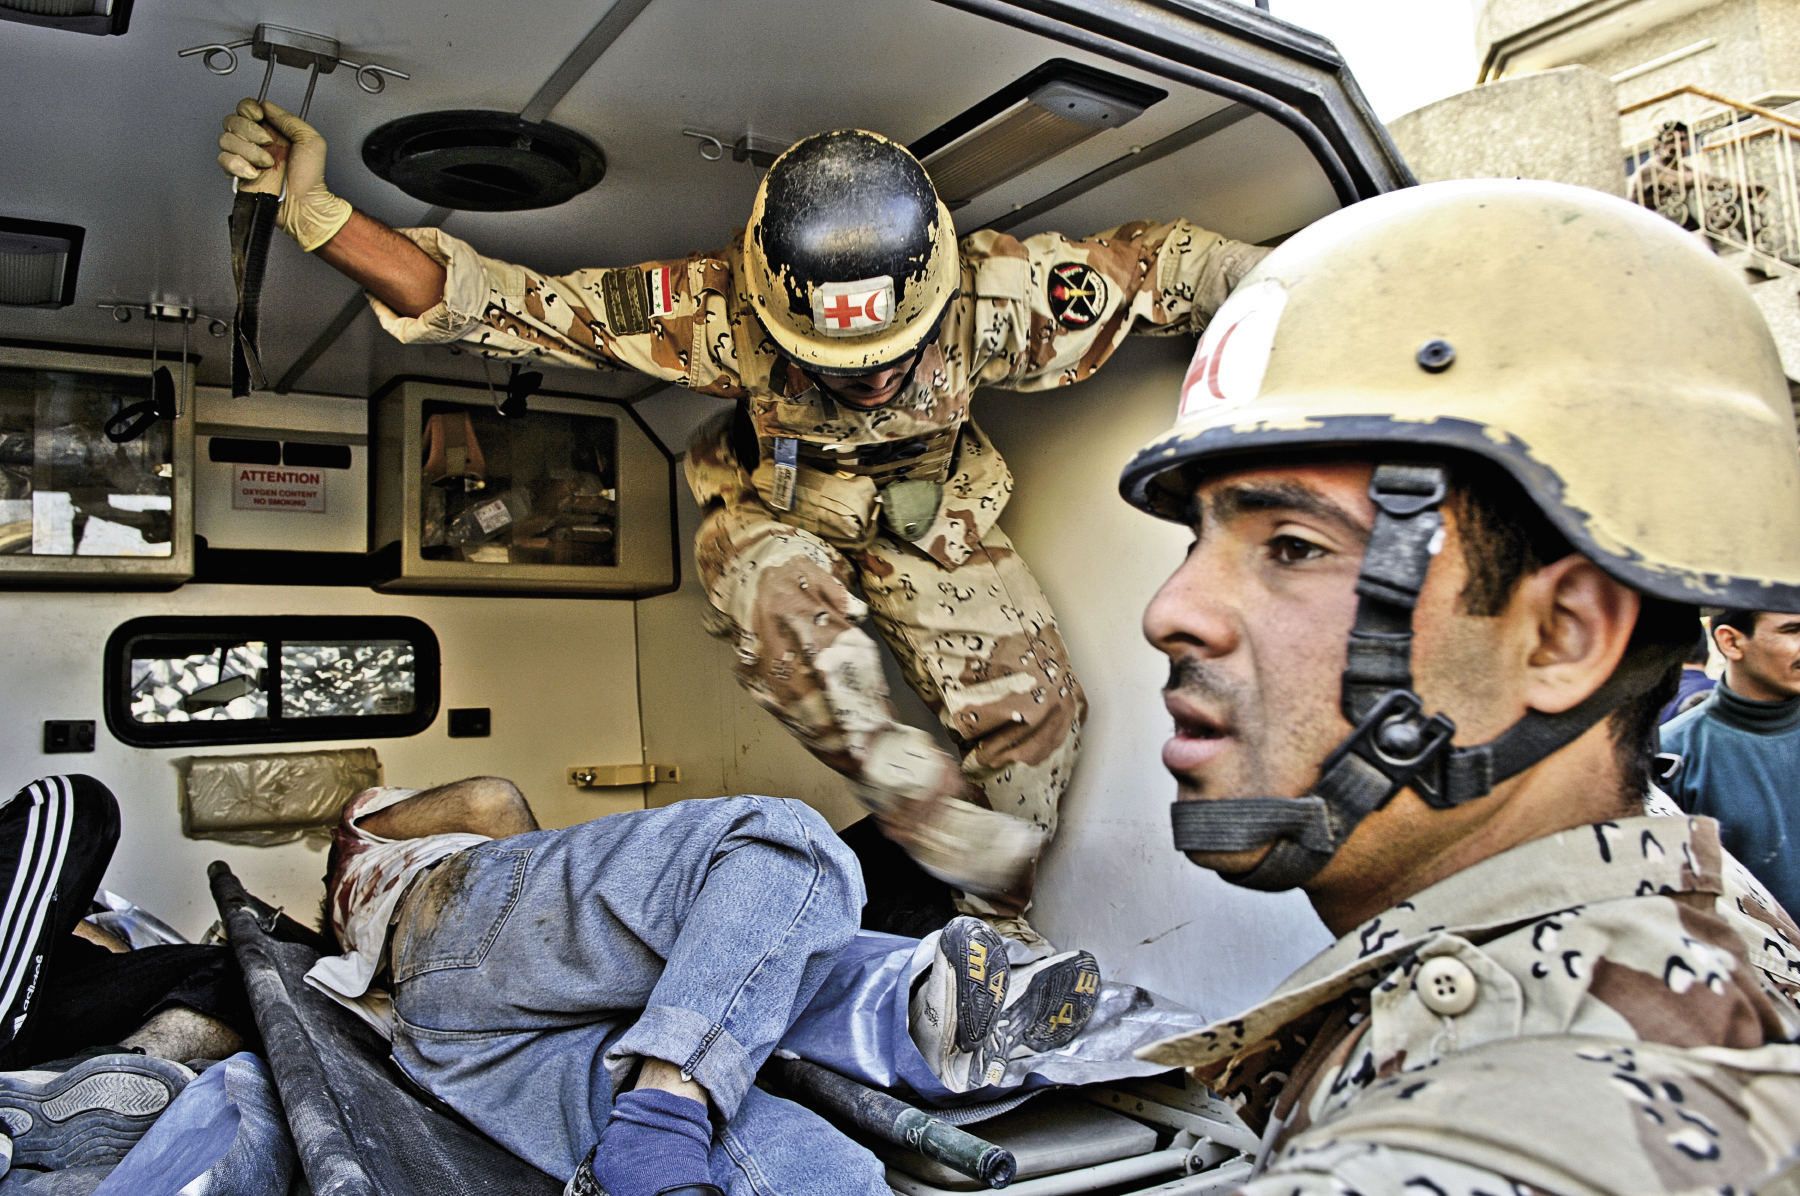 March 29, 2007: Iraqi Army soldiers load the bodies of deceased enemy forces into a waiting ambulance in Baqubah, Iraq.